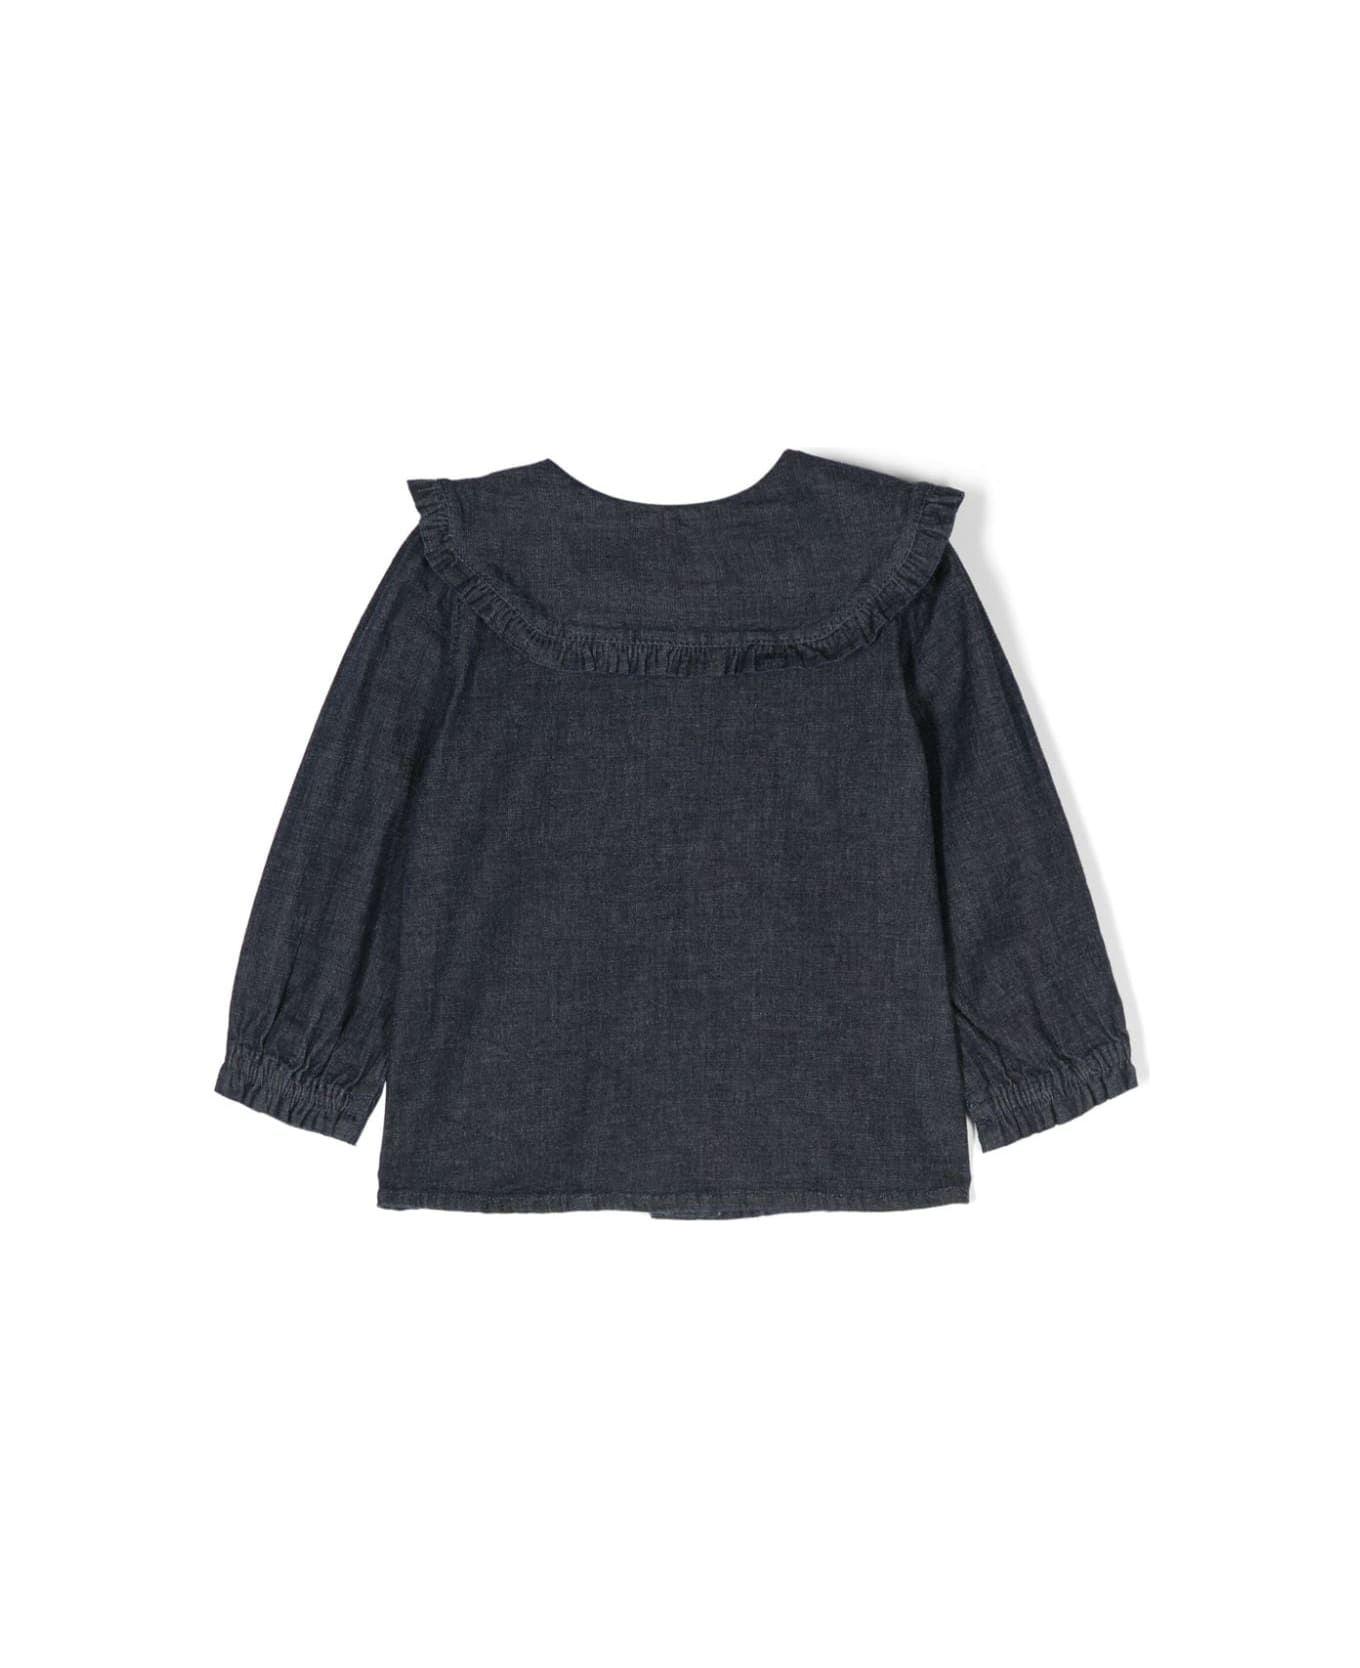 Zhoe & Tobiah Blusa Con Ruches - Variante unica